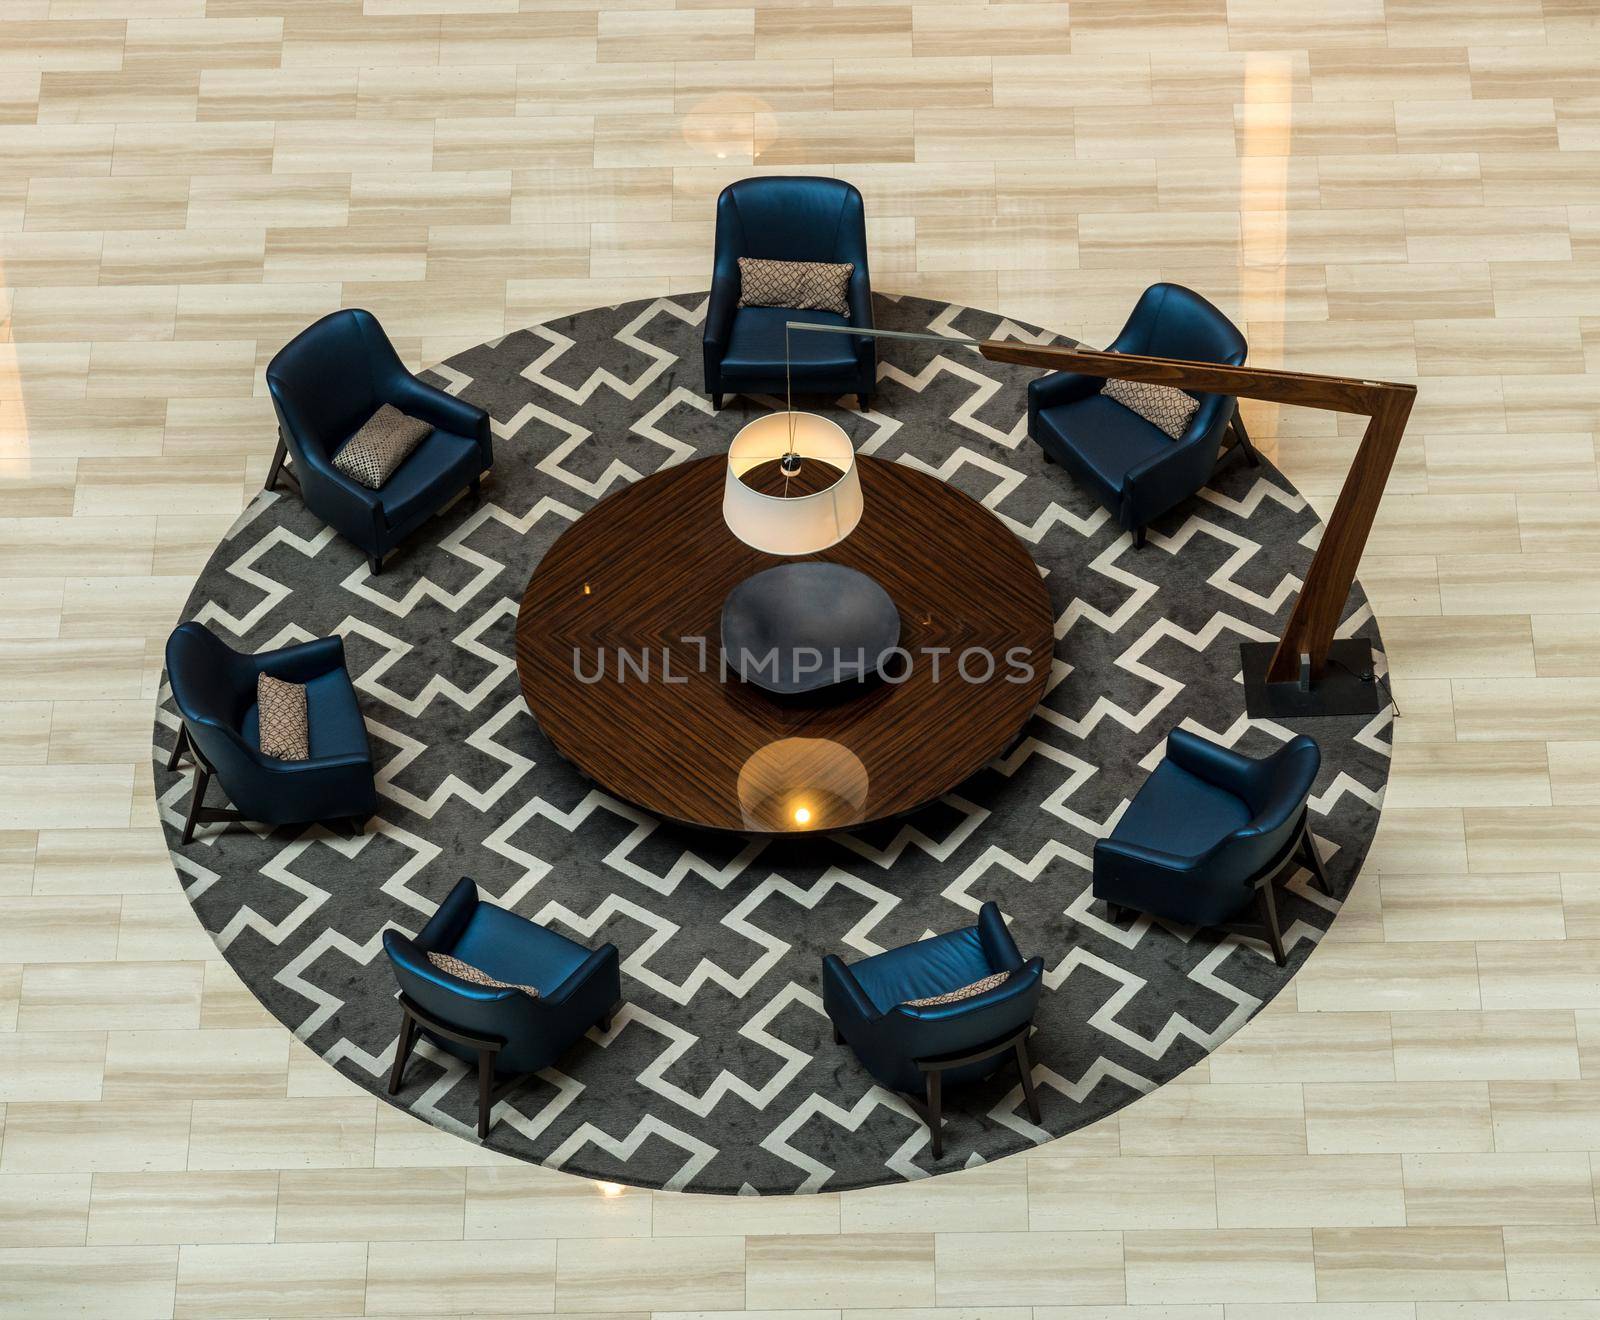 Aerial view above a hotel lobby with round table and chairs with no people due to coronavirus restrictions